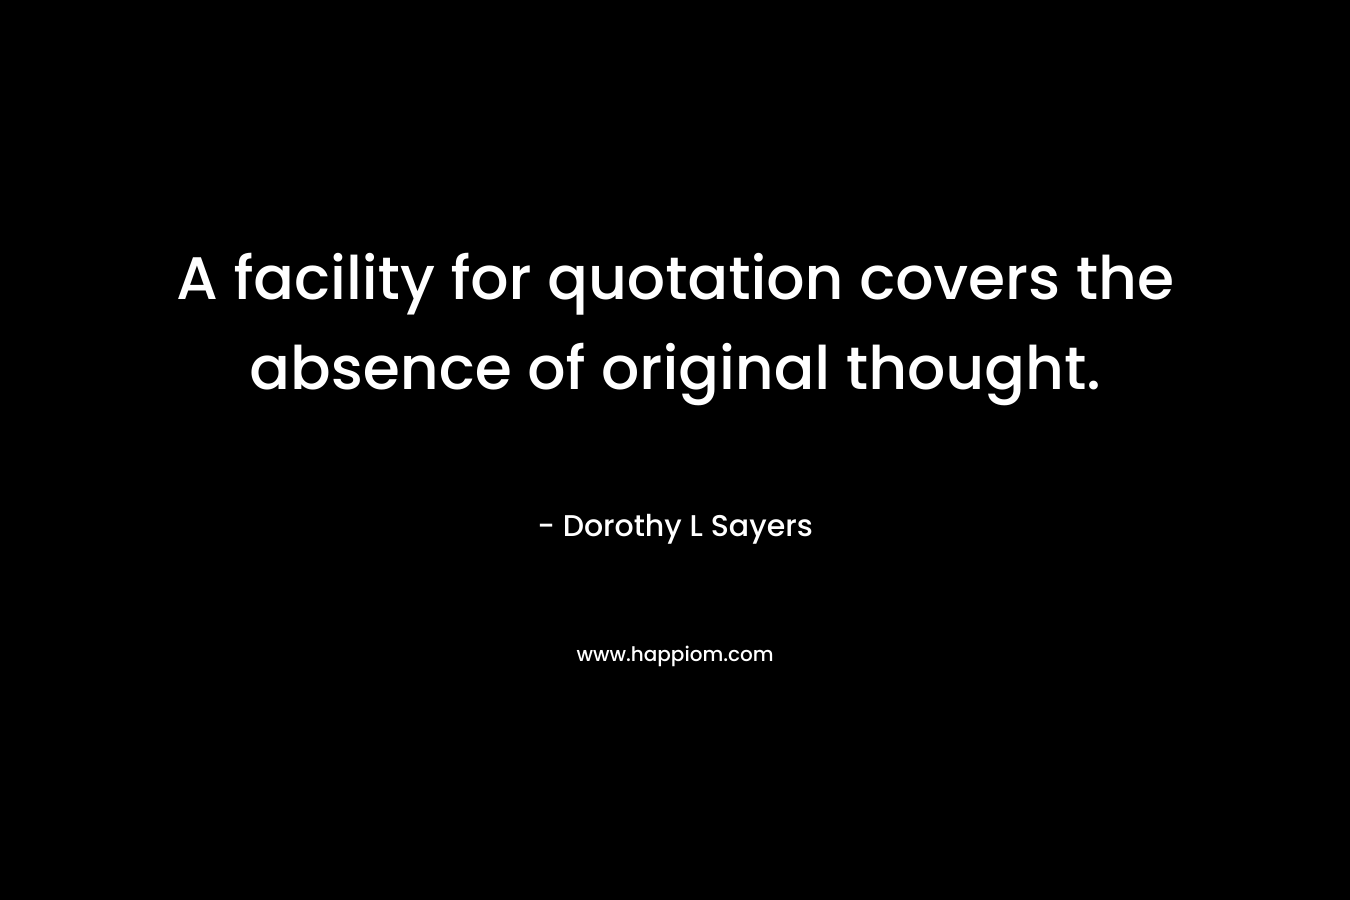 A facility for quotation covers the absence of original thought. – Dorothy L Sayers